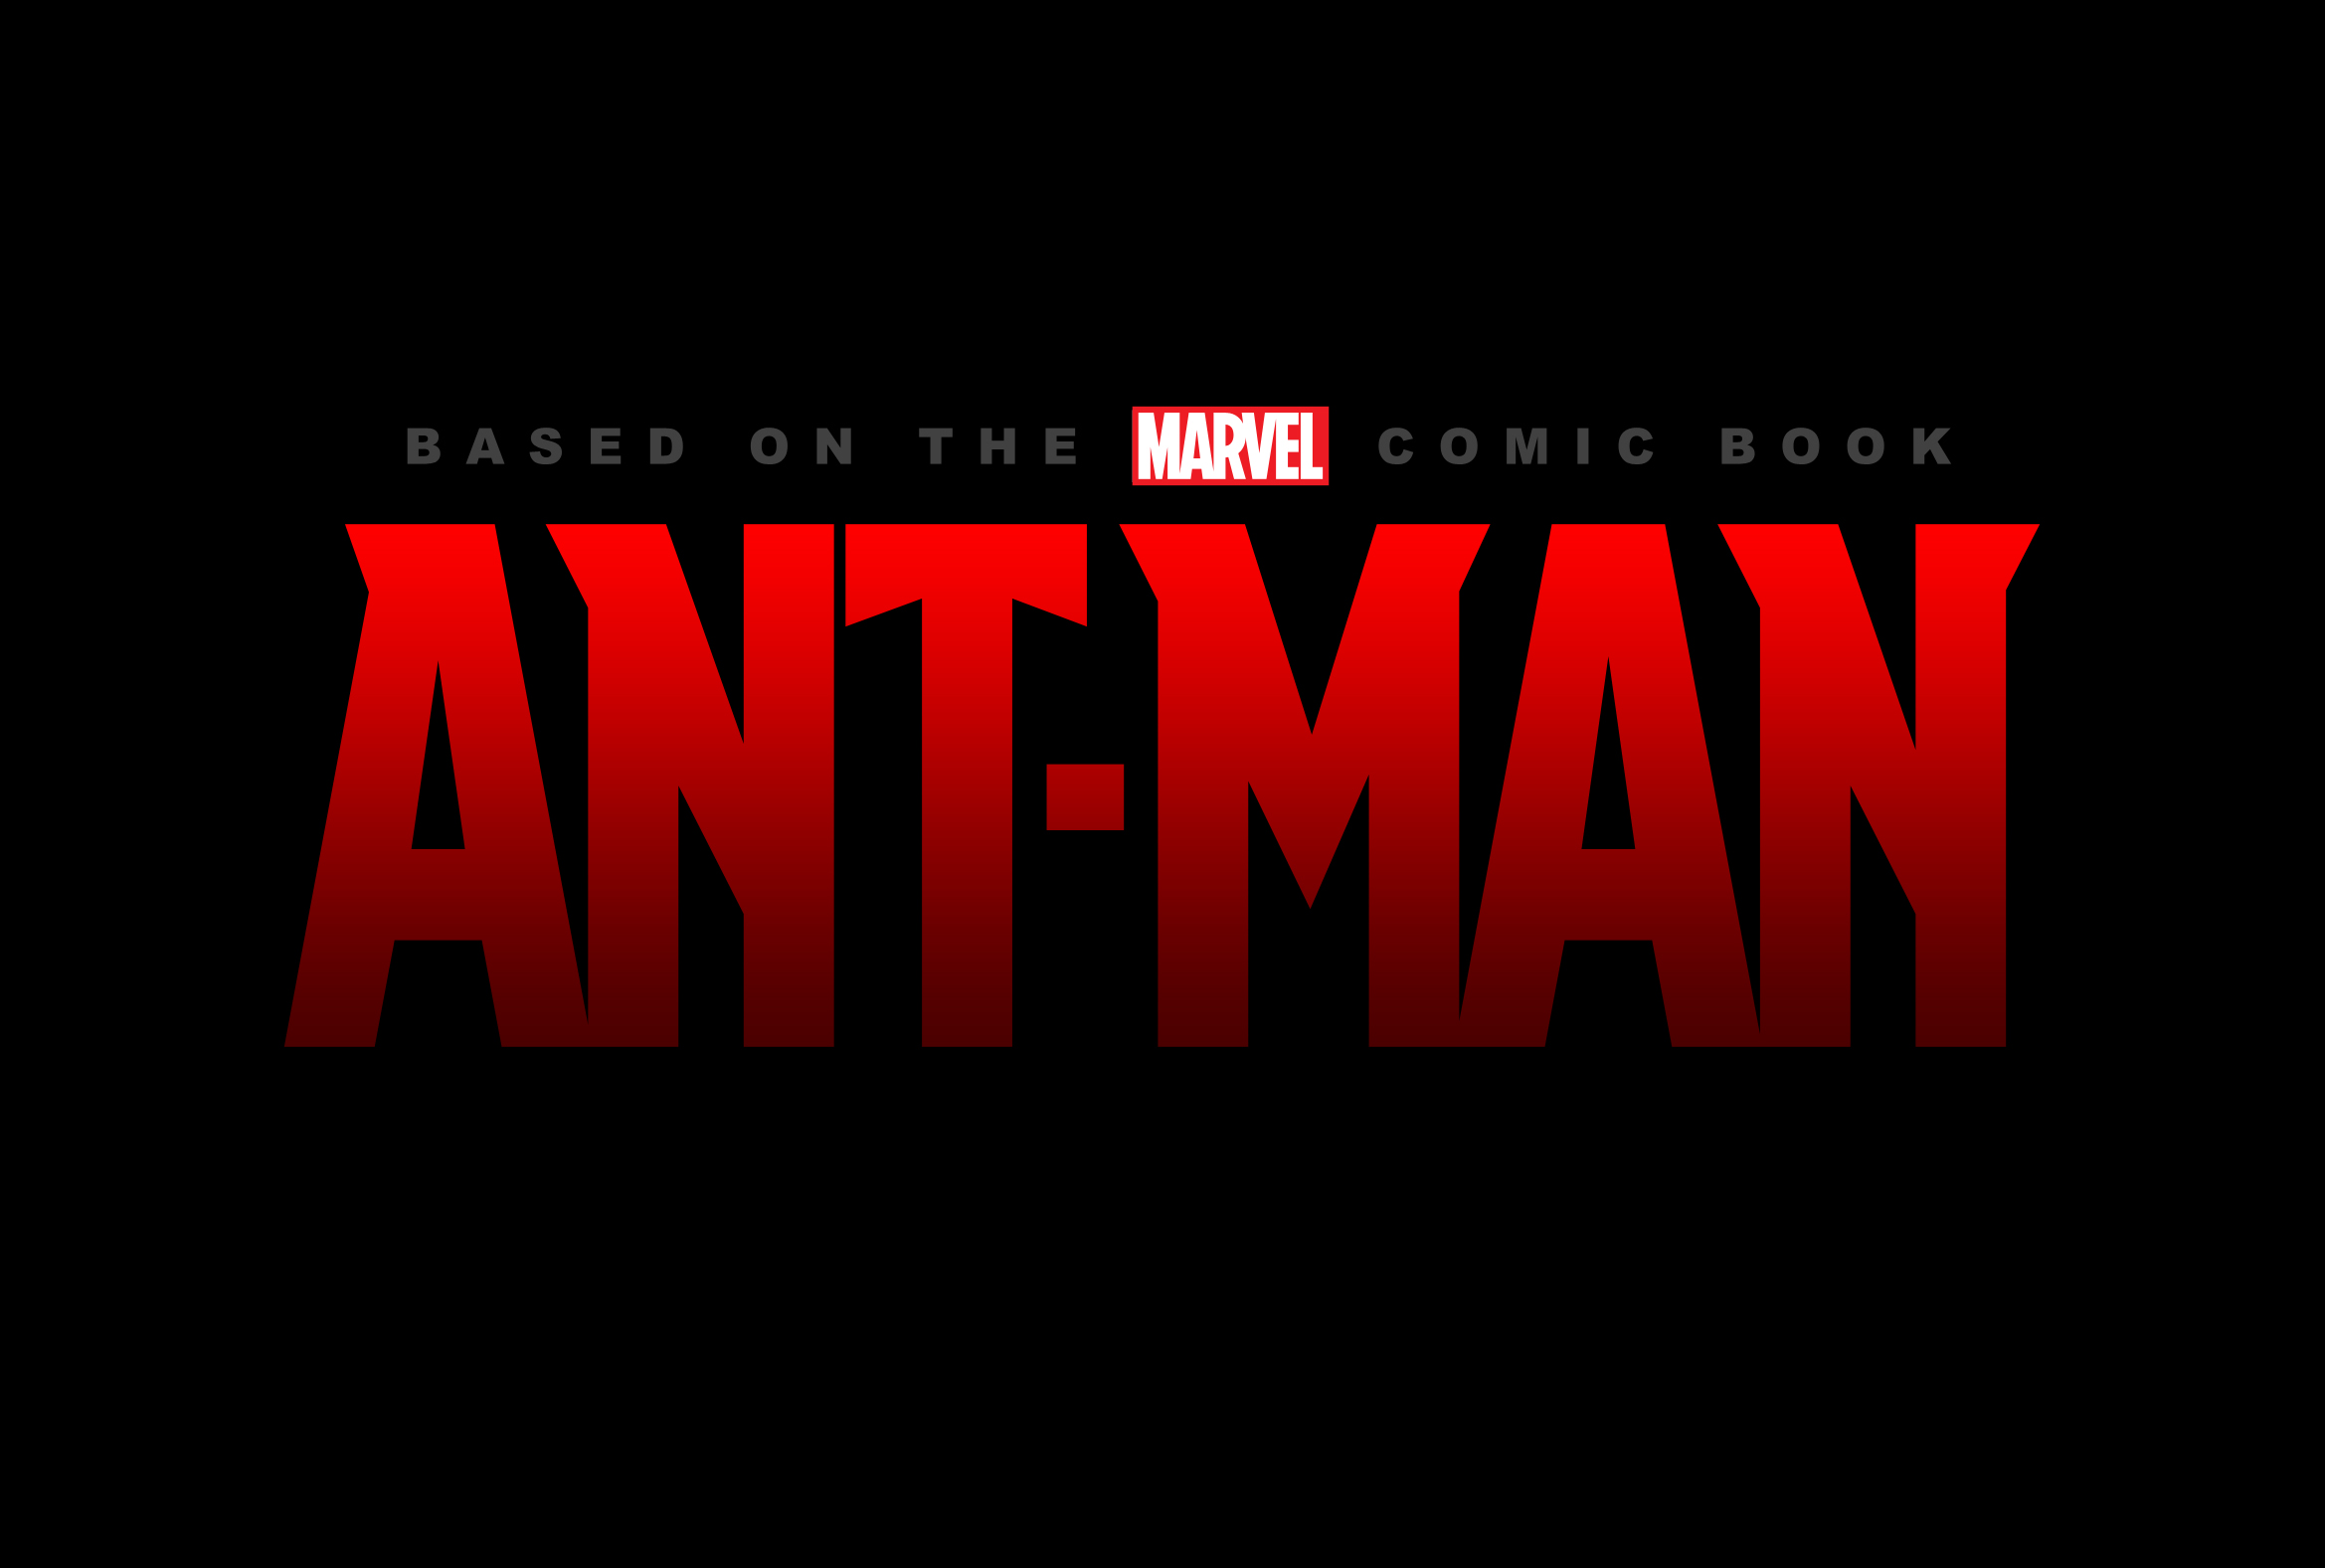 Ant-Man 3's Next Trailer Release Date Officially Revealed